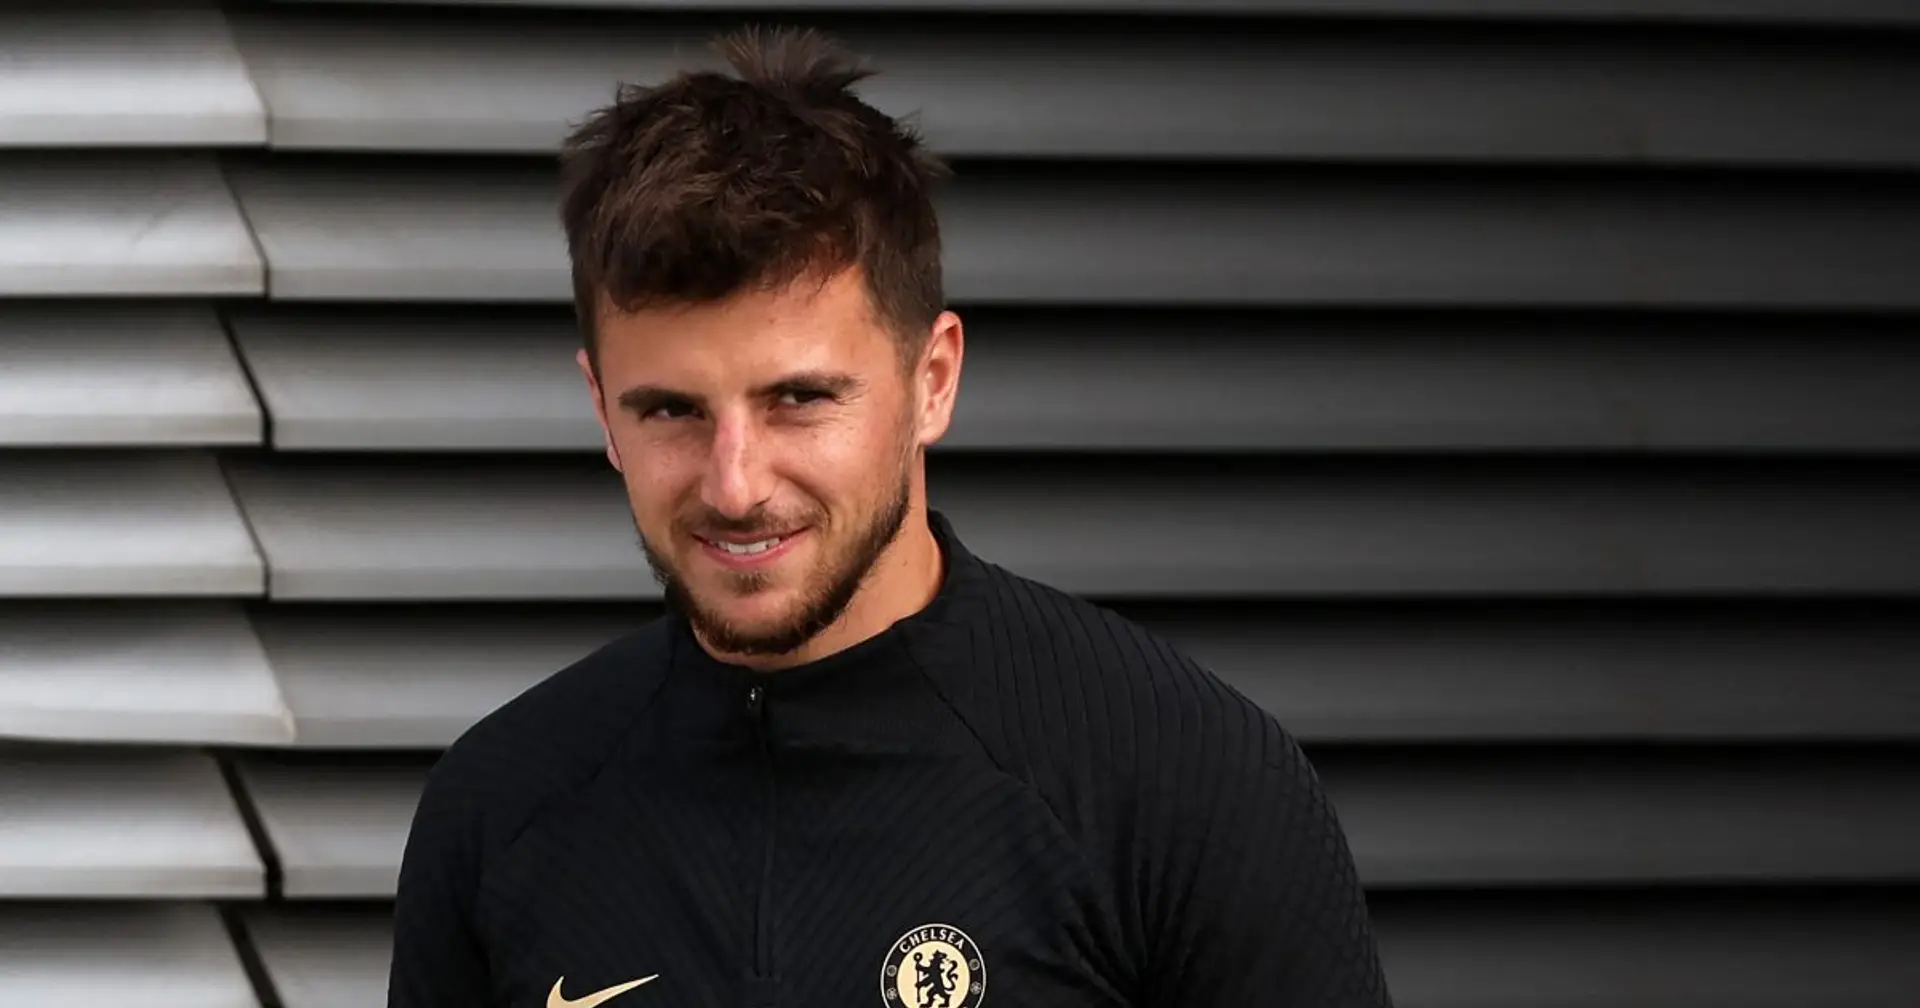 Mount could become second-biggest earner at Chelsea after signing new deal (reliability: 5 stars)